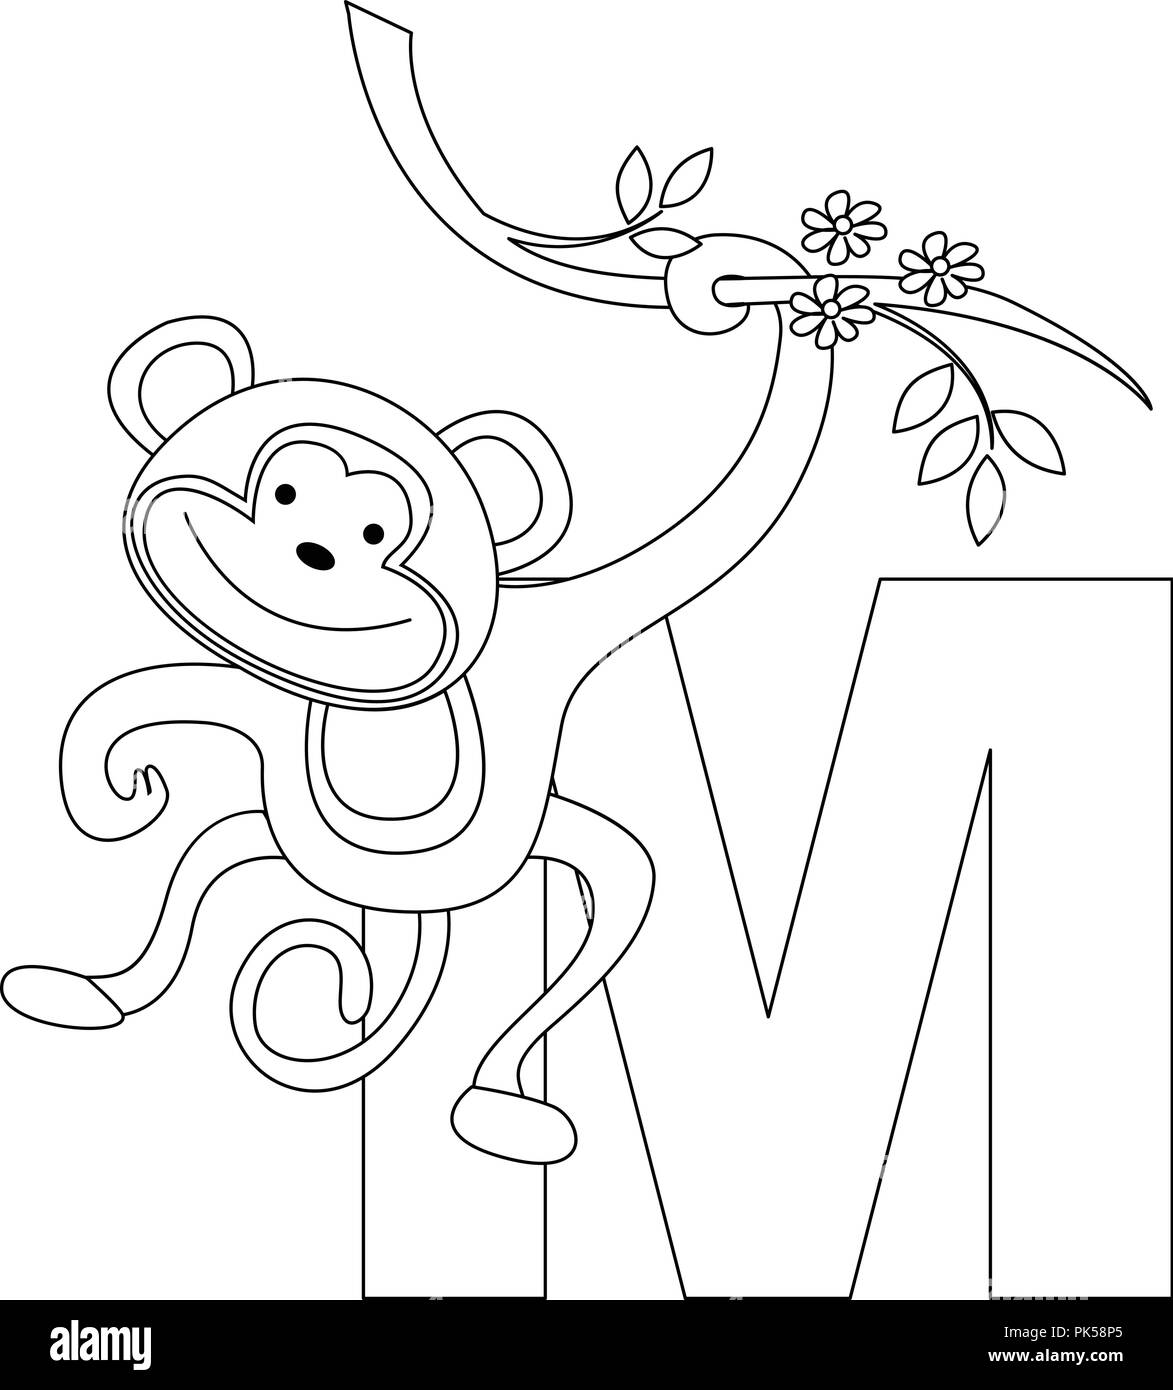 letters of the alphabet coloring pages